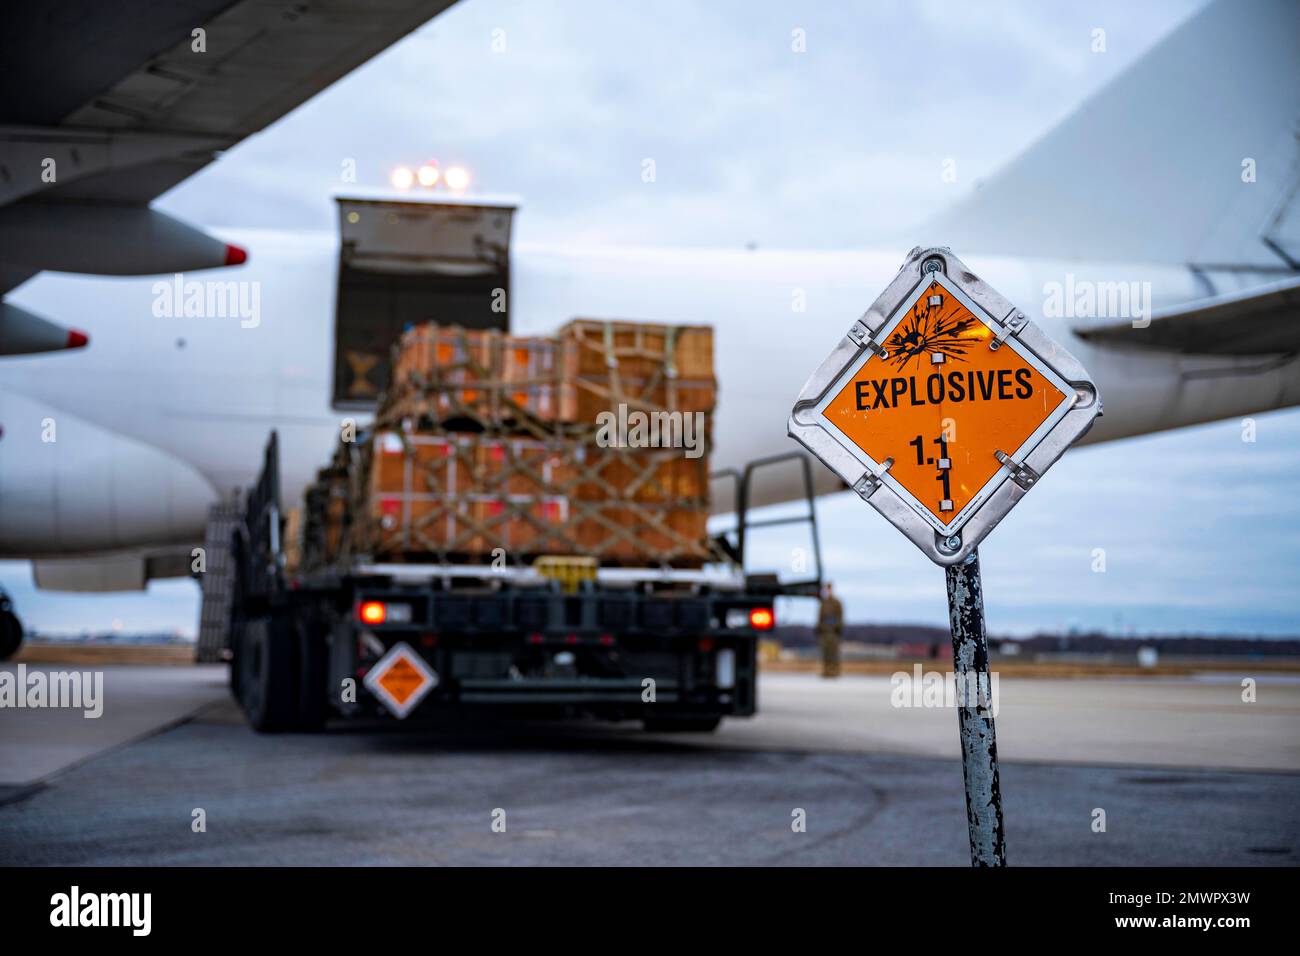 Dover AFB, Delaware, USA. 13th Jan, 2023. An explosives sign marks the cordon around a commercial aircraft during a security assistance mission at Dover Air Force Base, Delaware, Jan. 13, 2023. The United States has committed more than $24.5 billion in security assistance to Ukraine since the beginning of Russian aggression. Credit: Amanda Jett/U.S. Air Force /ZUMA Press Wire Service/ZUMAPRESS.com/Alamy Live News Stock Photo